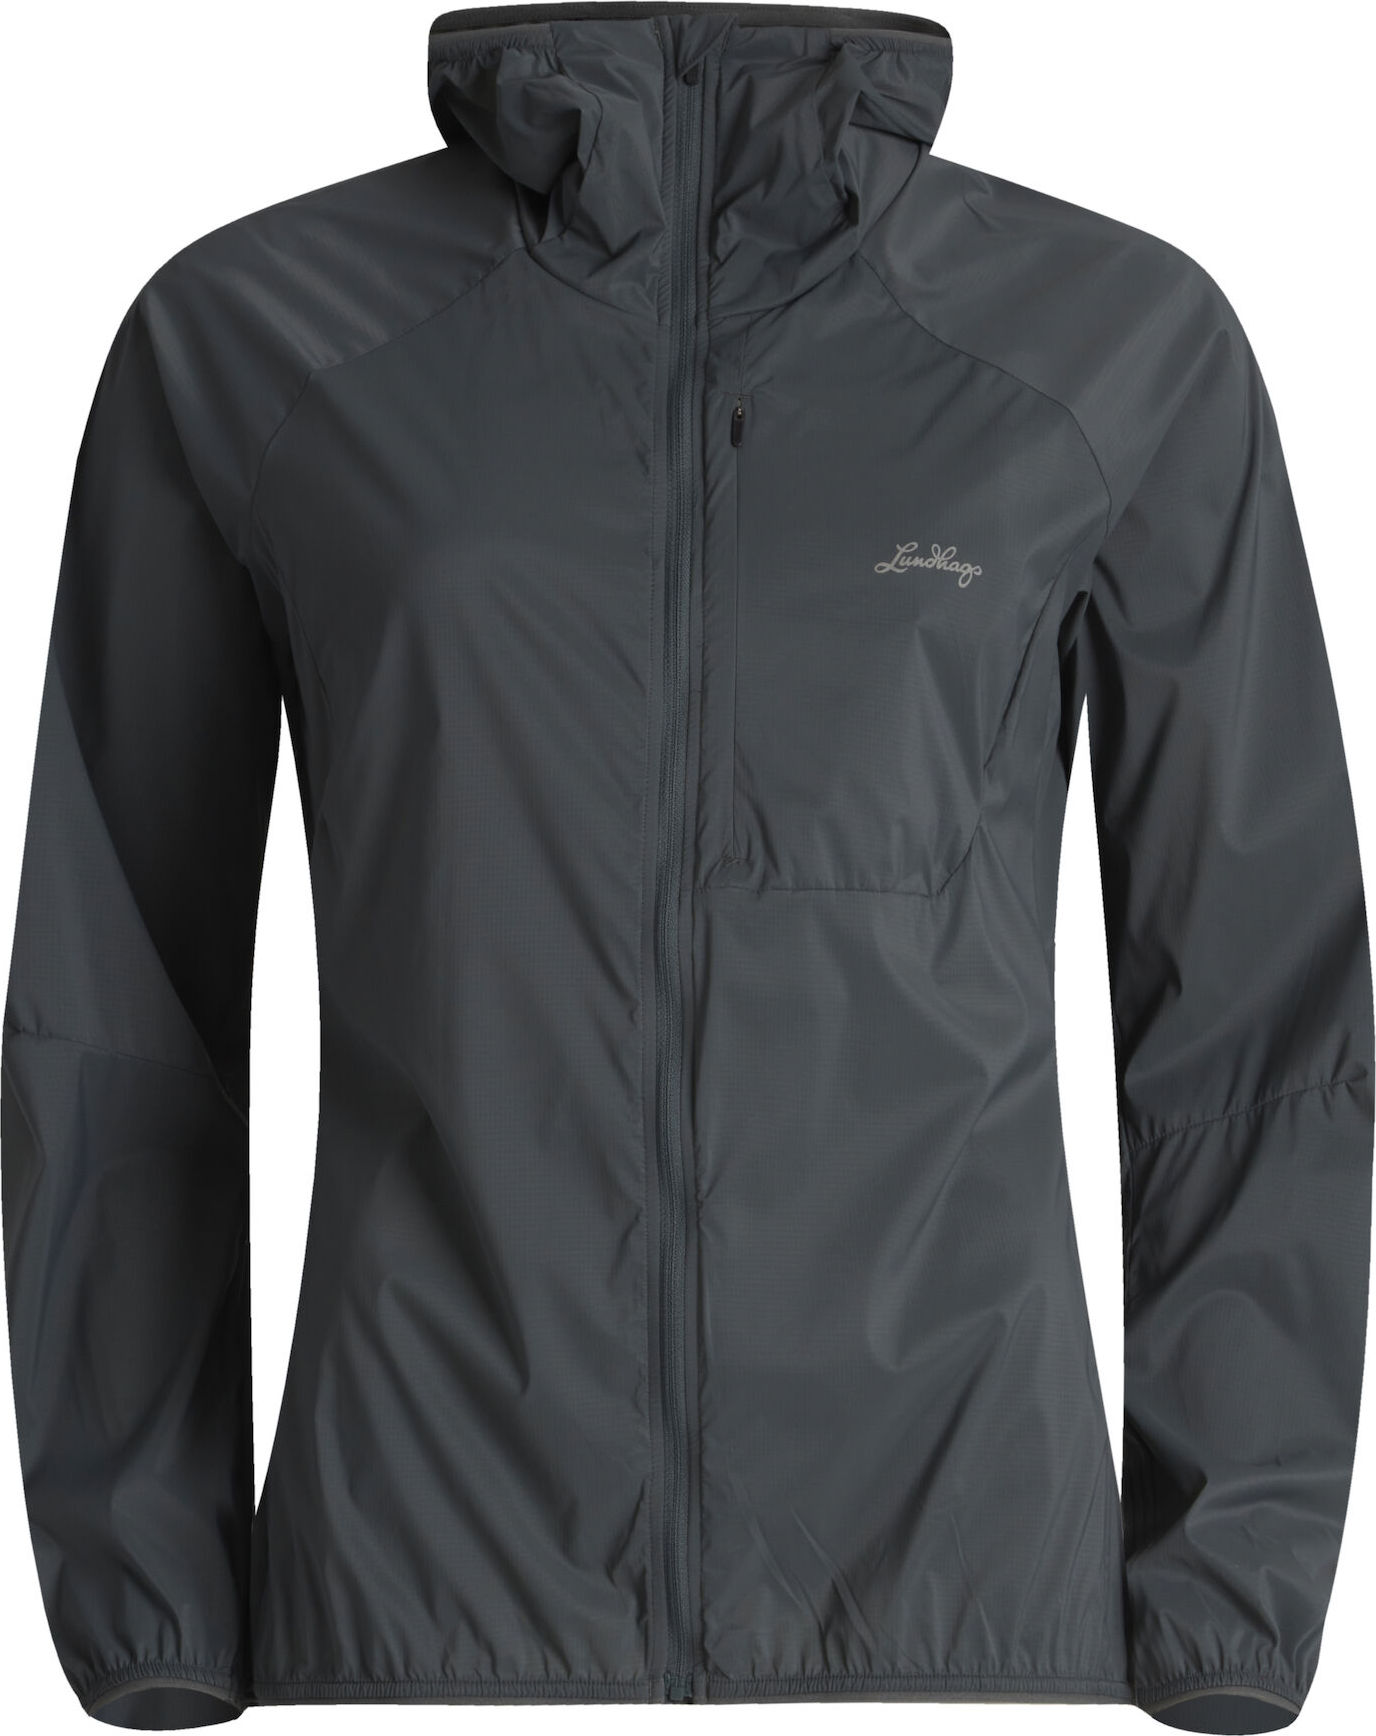 Lundhags Women’s Tived Light Wind Jacket Dark Agave